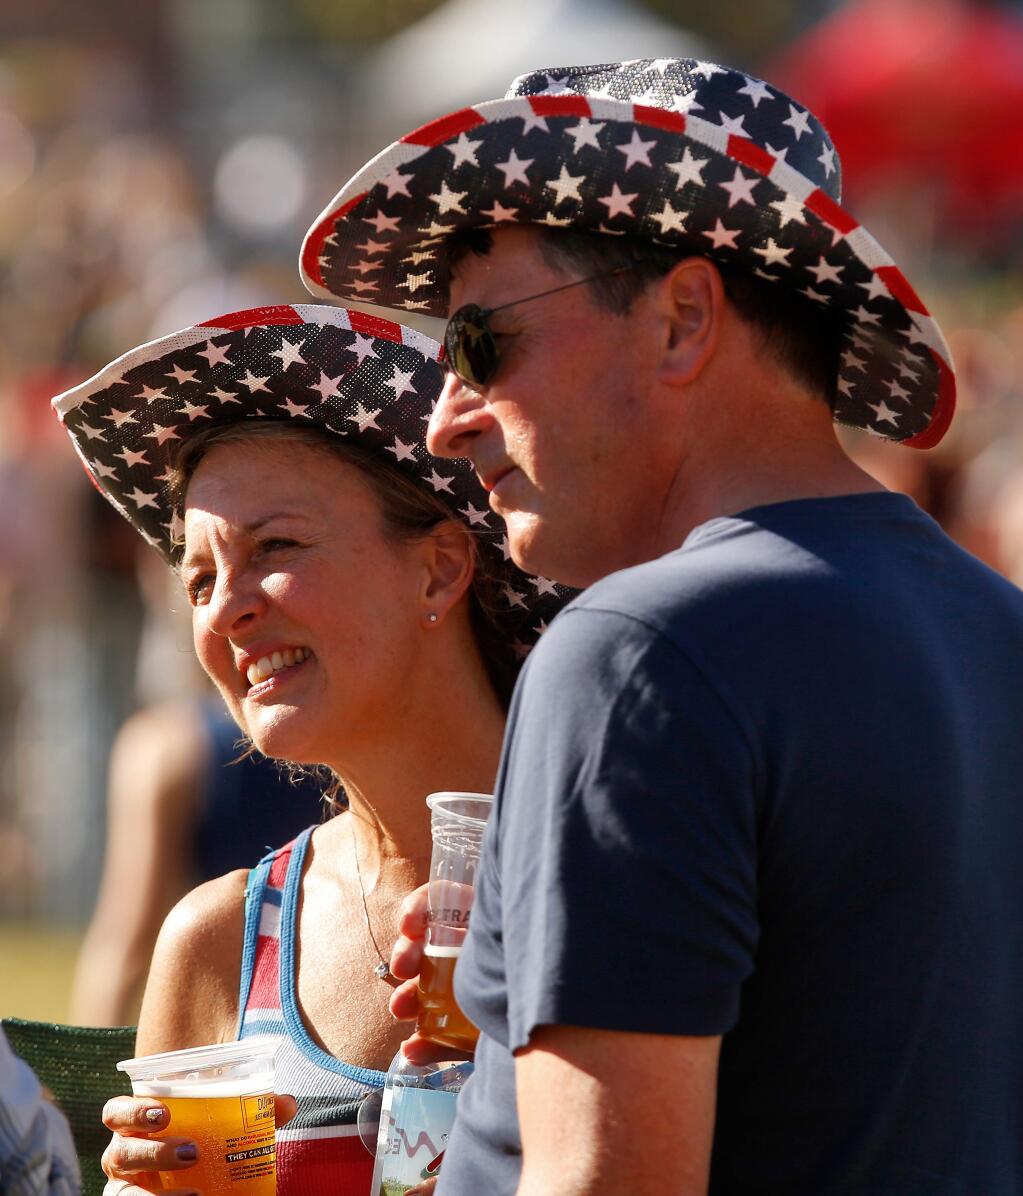 Lauri and John Whims of Seattle display their patriotism in matching stars and stripes cowboy hats at Country Summer at the Sonoma County Fairgrounds in Santa Rosa on Friday, June 16, 2017. (Alvin Jornada / The Press Democrat)